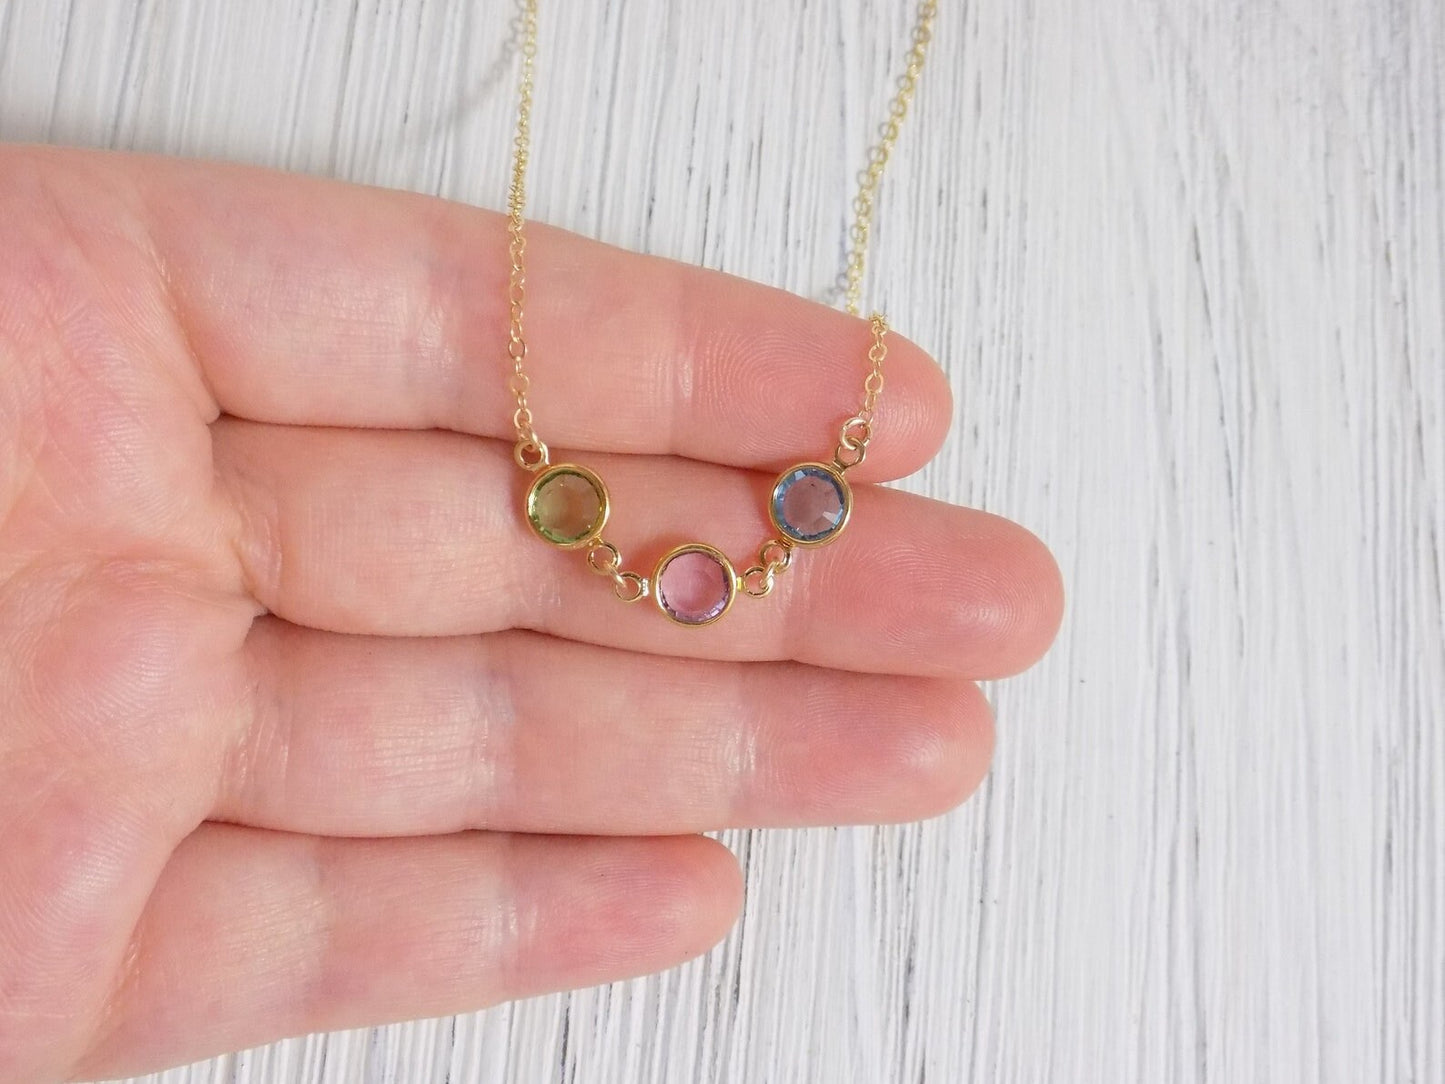 Dainty Birthstone Necklace - Family Birthstone Necklace Gold - Custom Birthday Gift - Mothers Gift - Mothers Day Gift For Mom - B-04